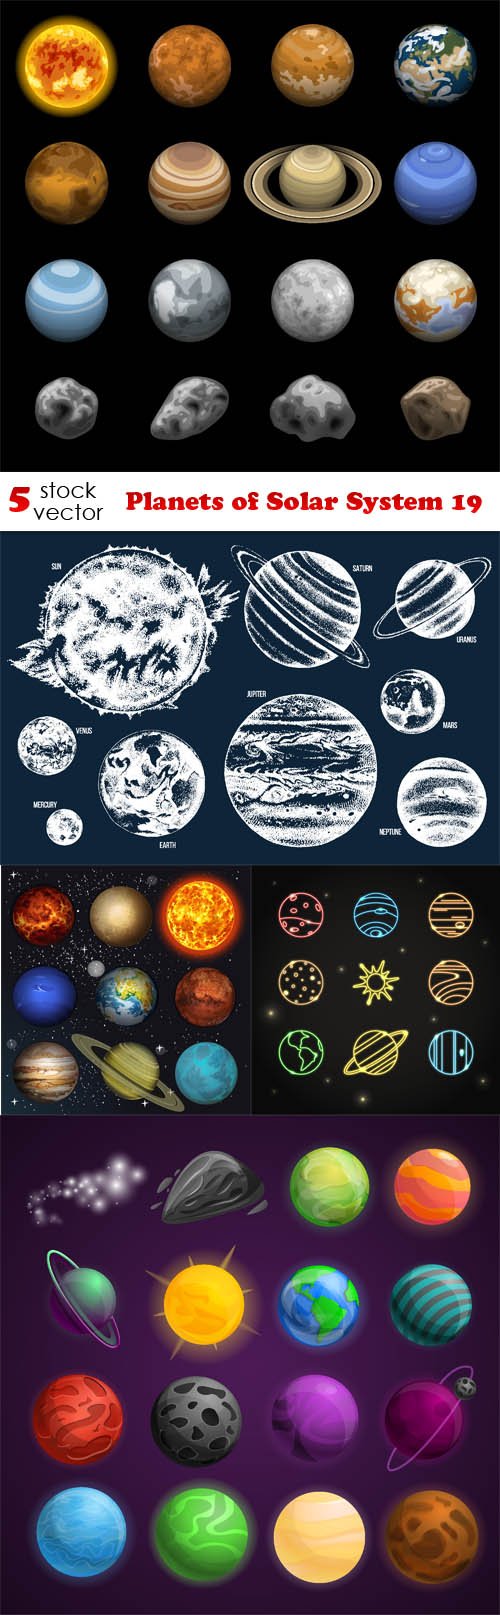 Vectors - Planets of Solar System 19